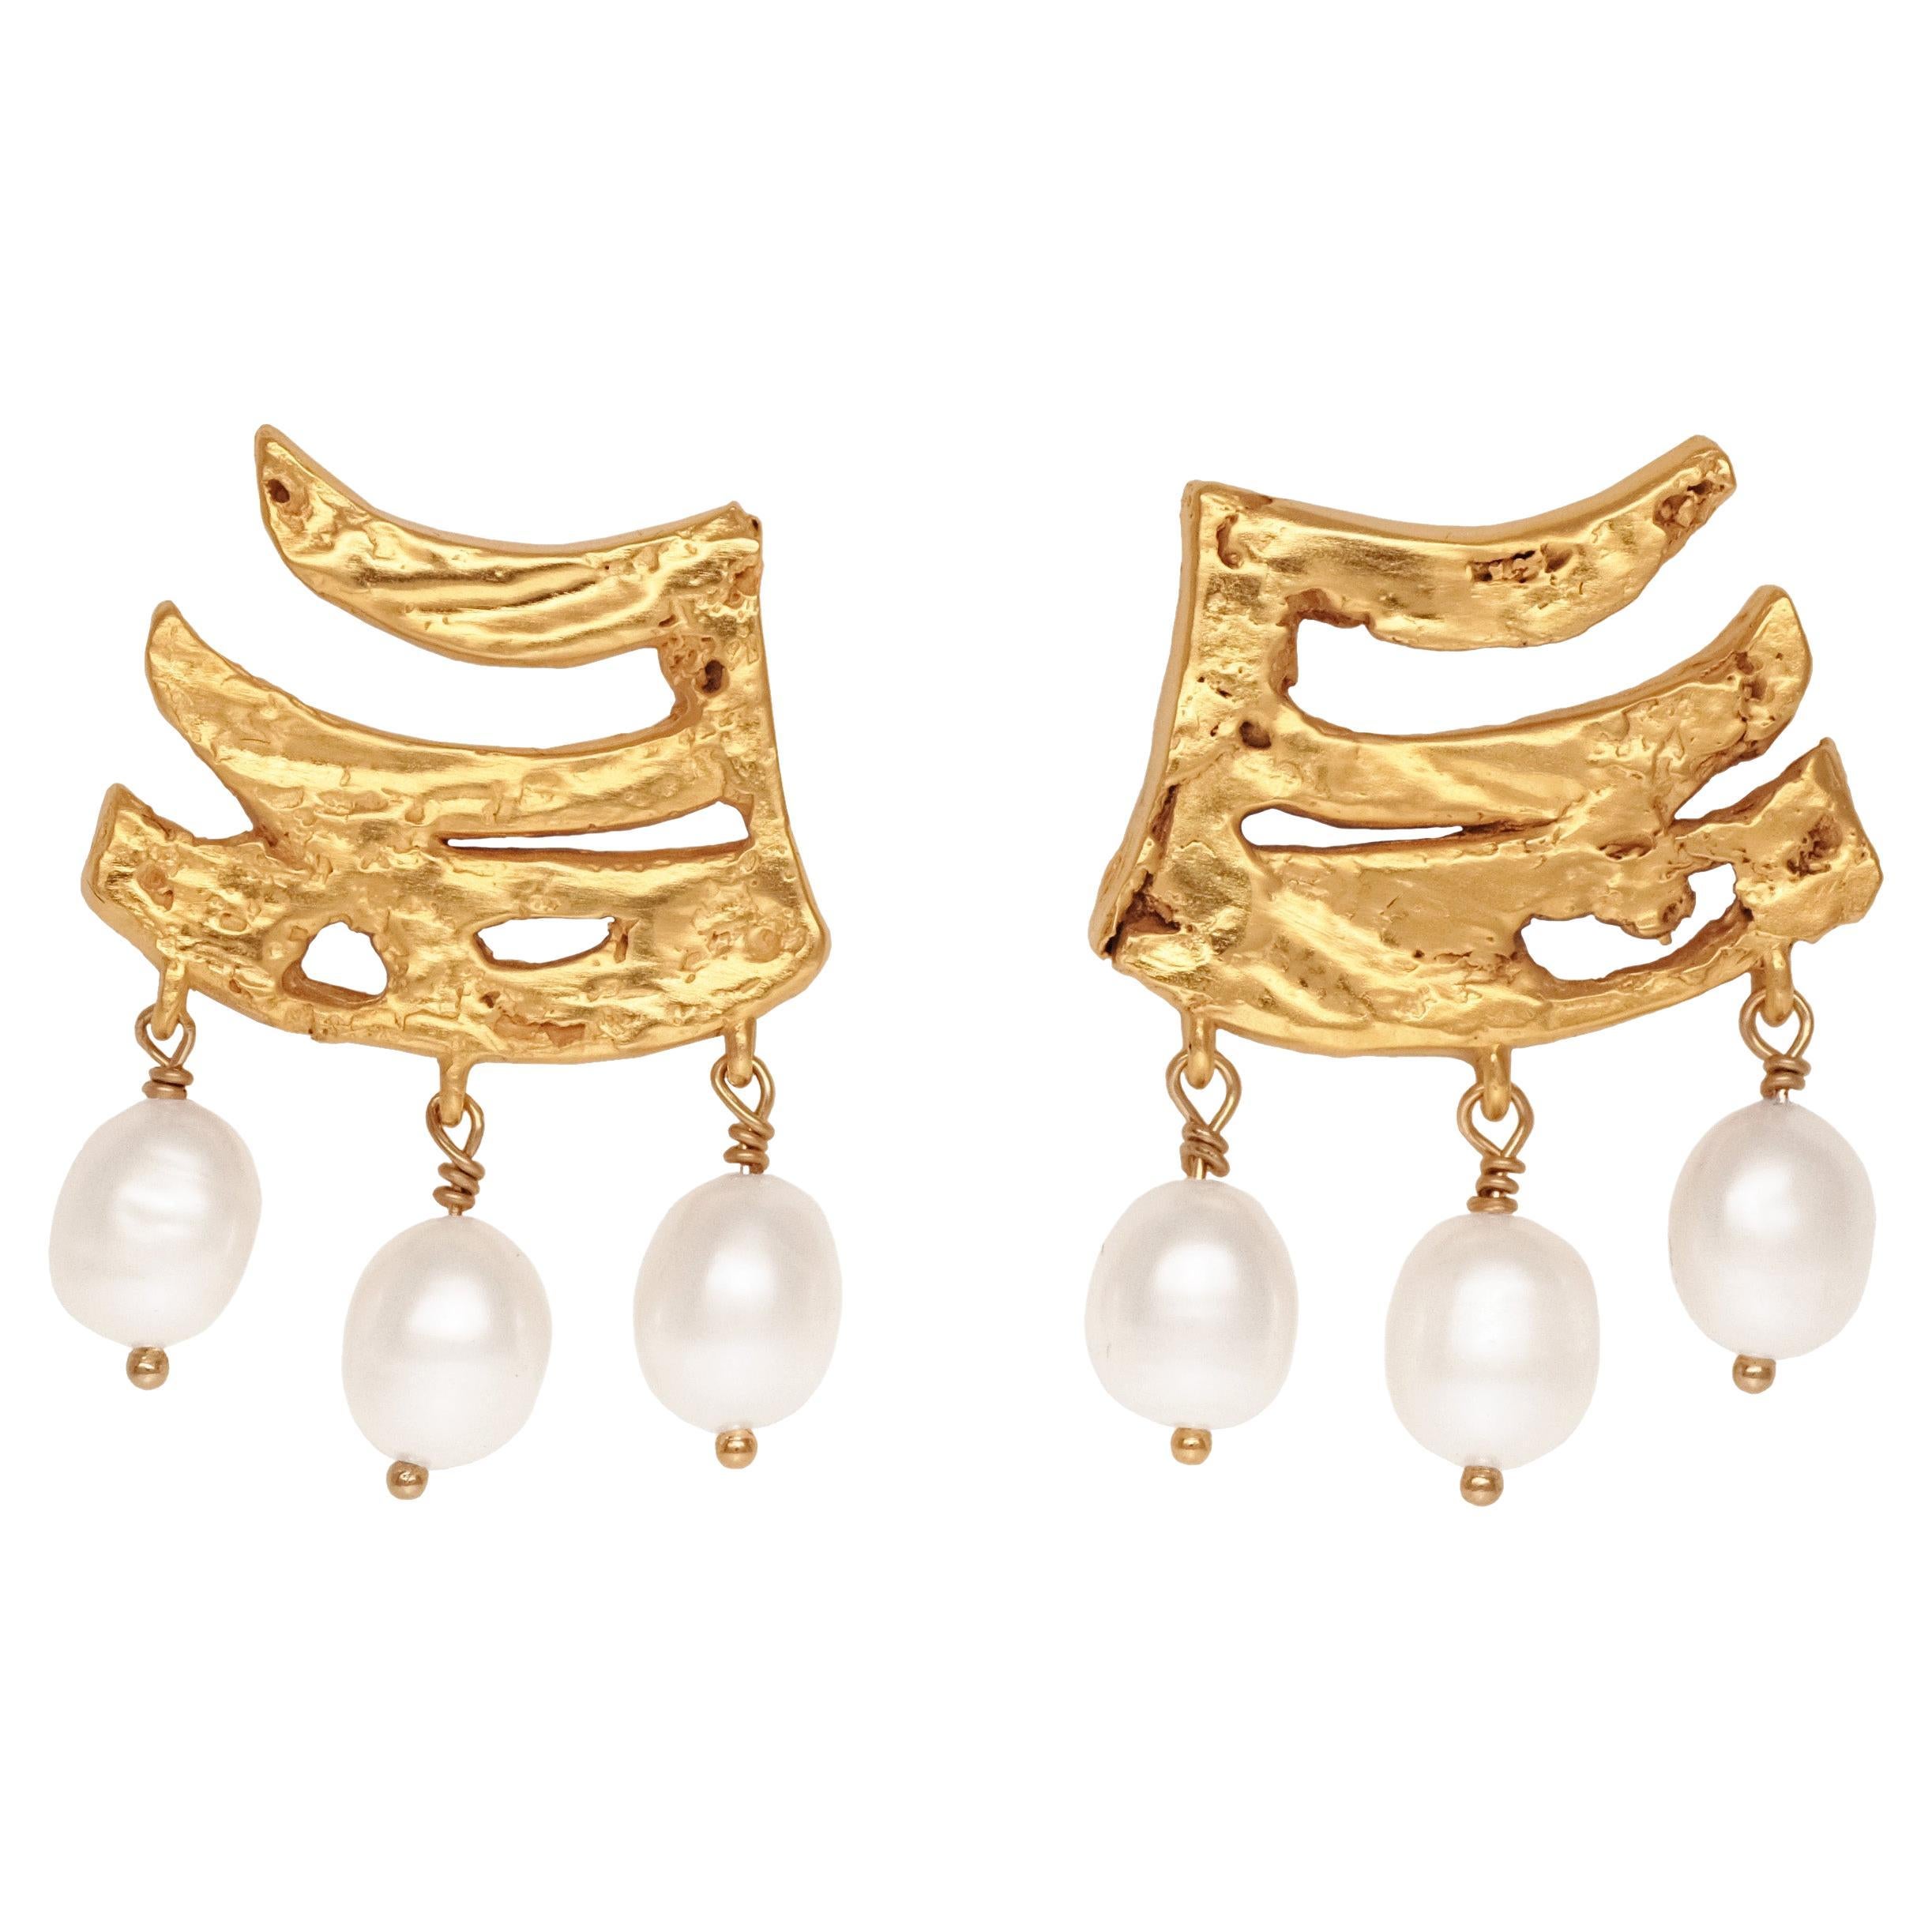 Eternal Luck Earrings in Gold with Freshwater Pearls For Sale